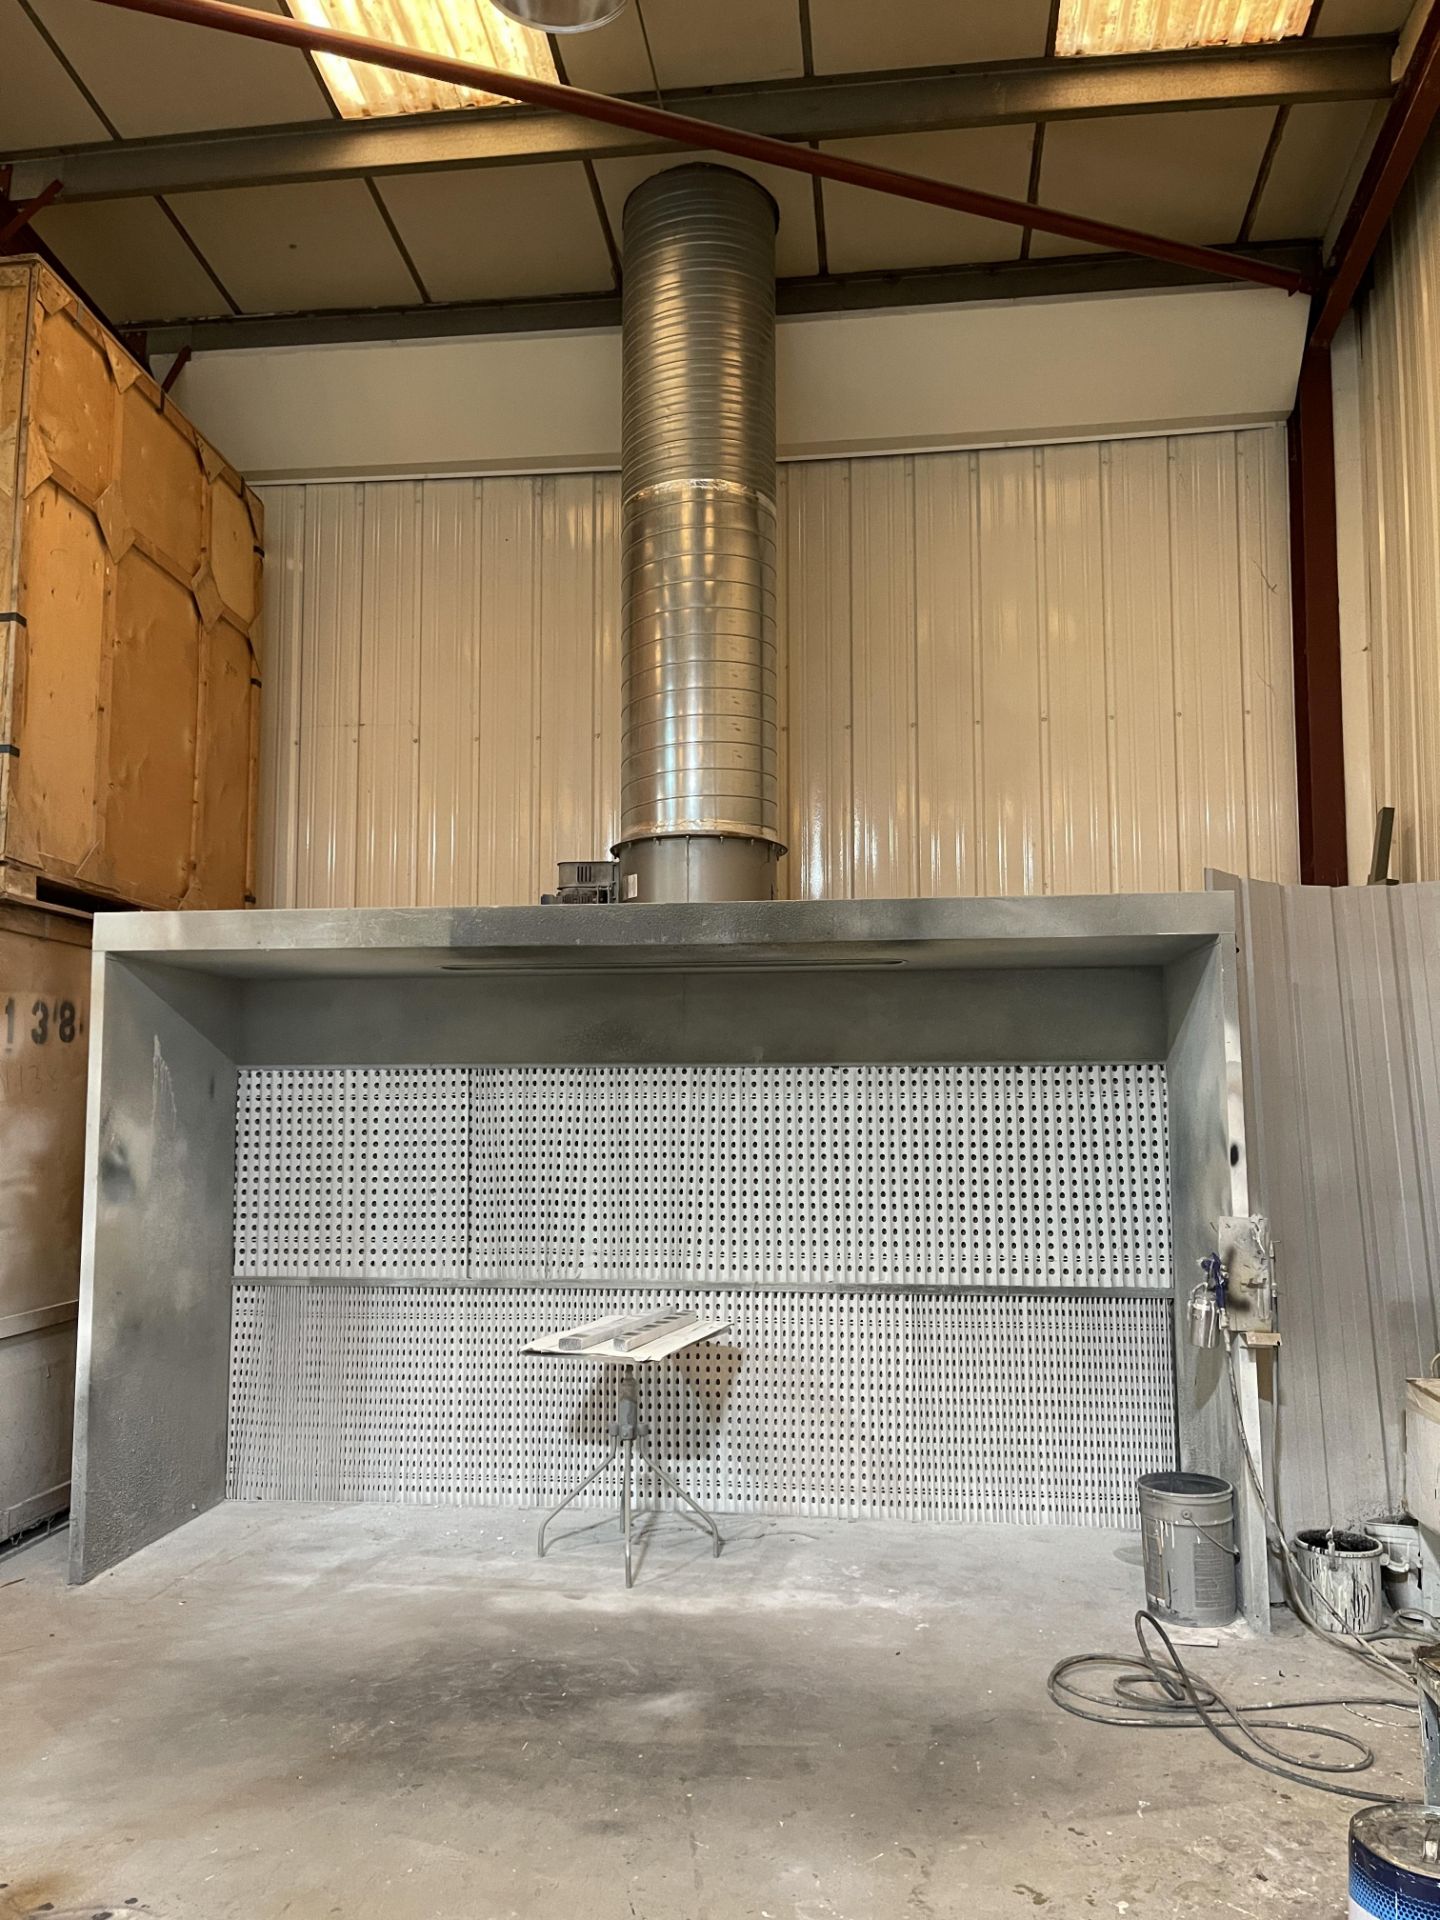 Dryback Spray Booth together with all Associated Equipment to Include Spray Guns - Please Note - Image 2 of 5